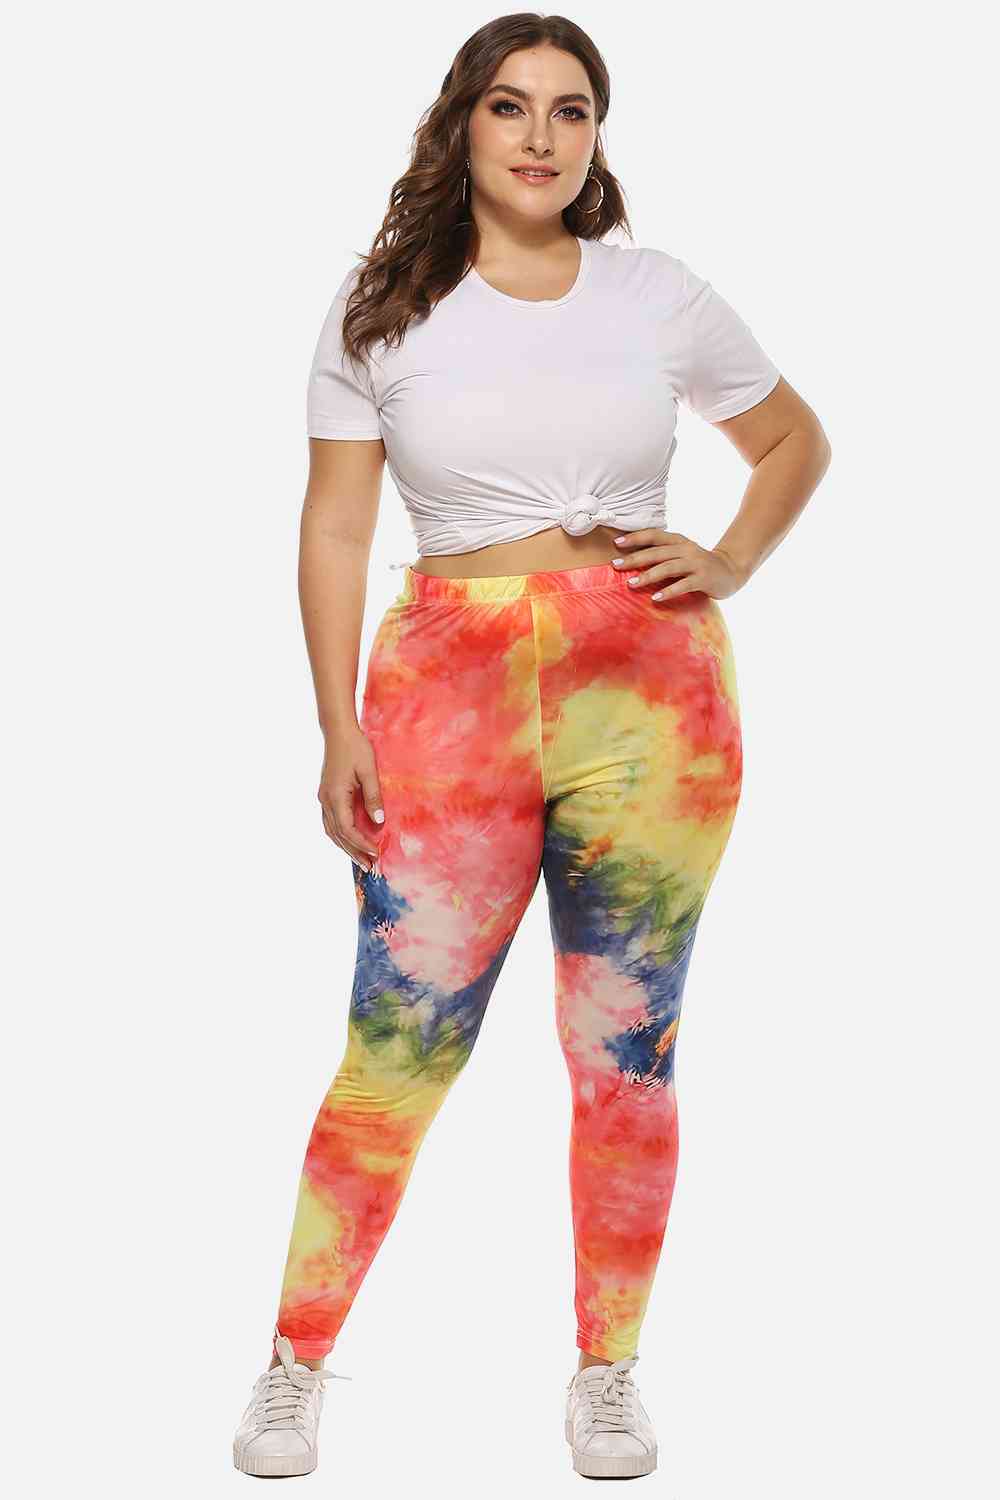 Plus Size Tie Dye Legging – FOR THE LOVE OF TEE-SHIRTS